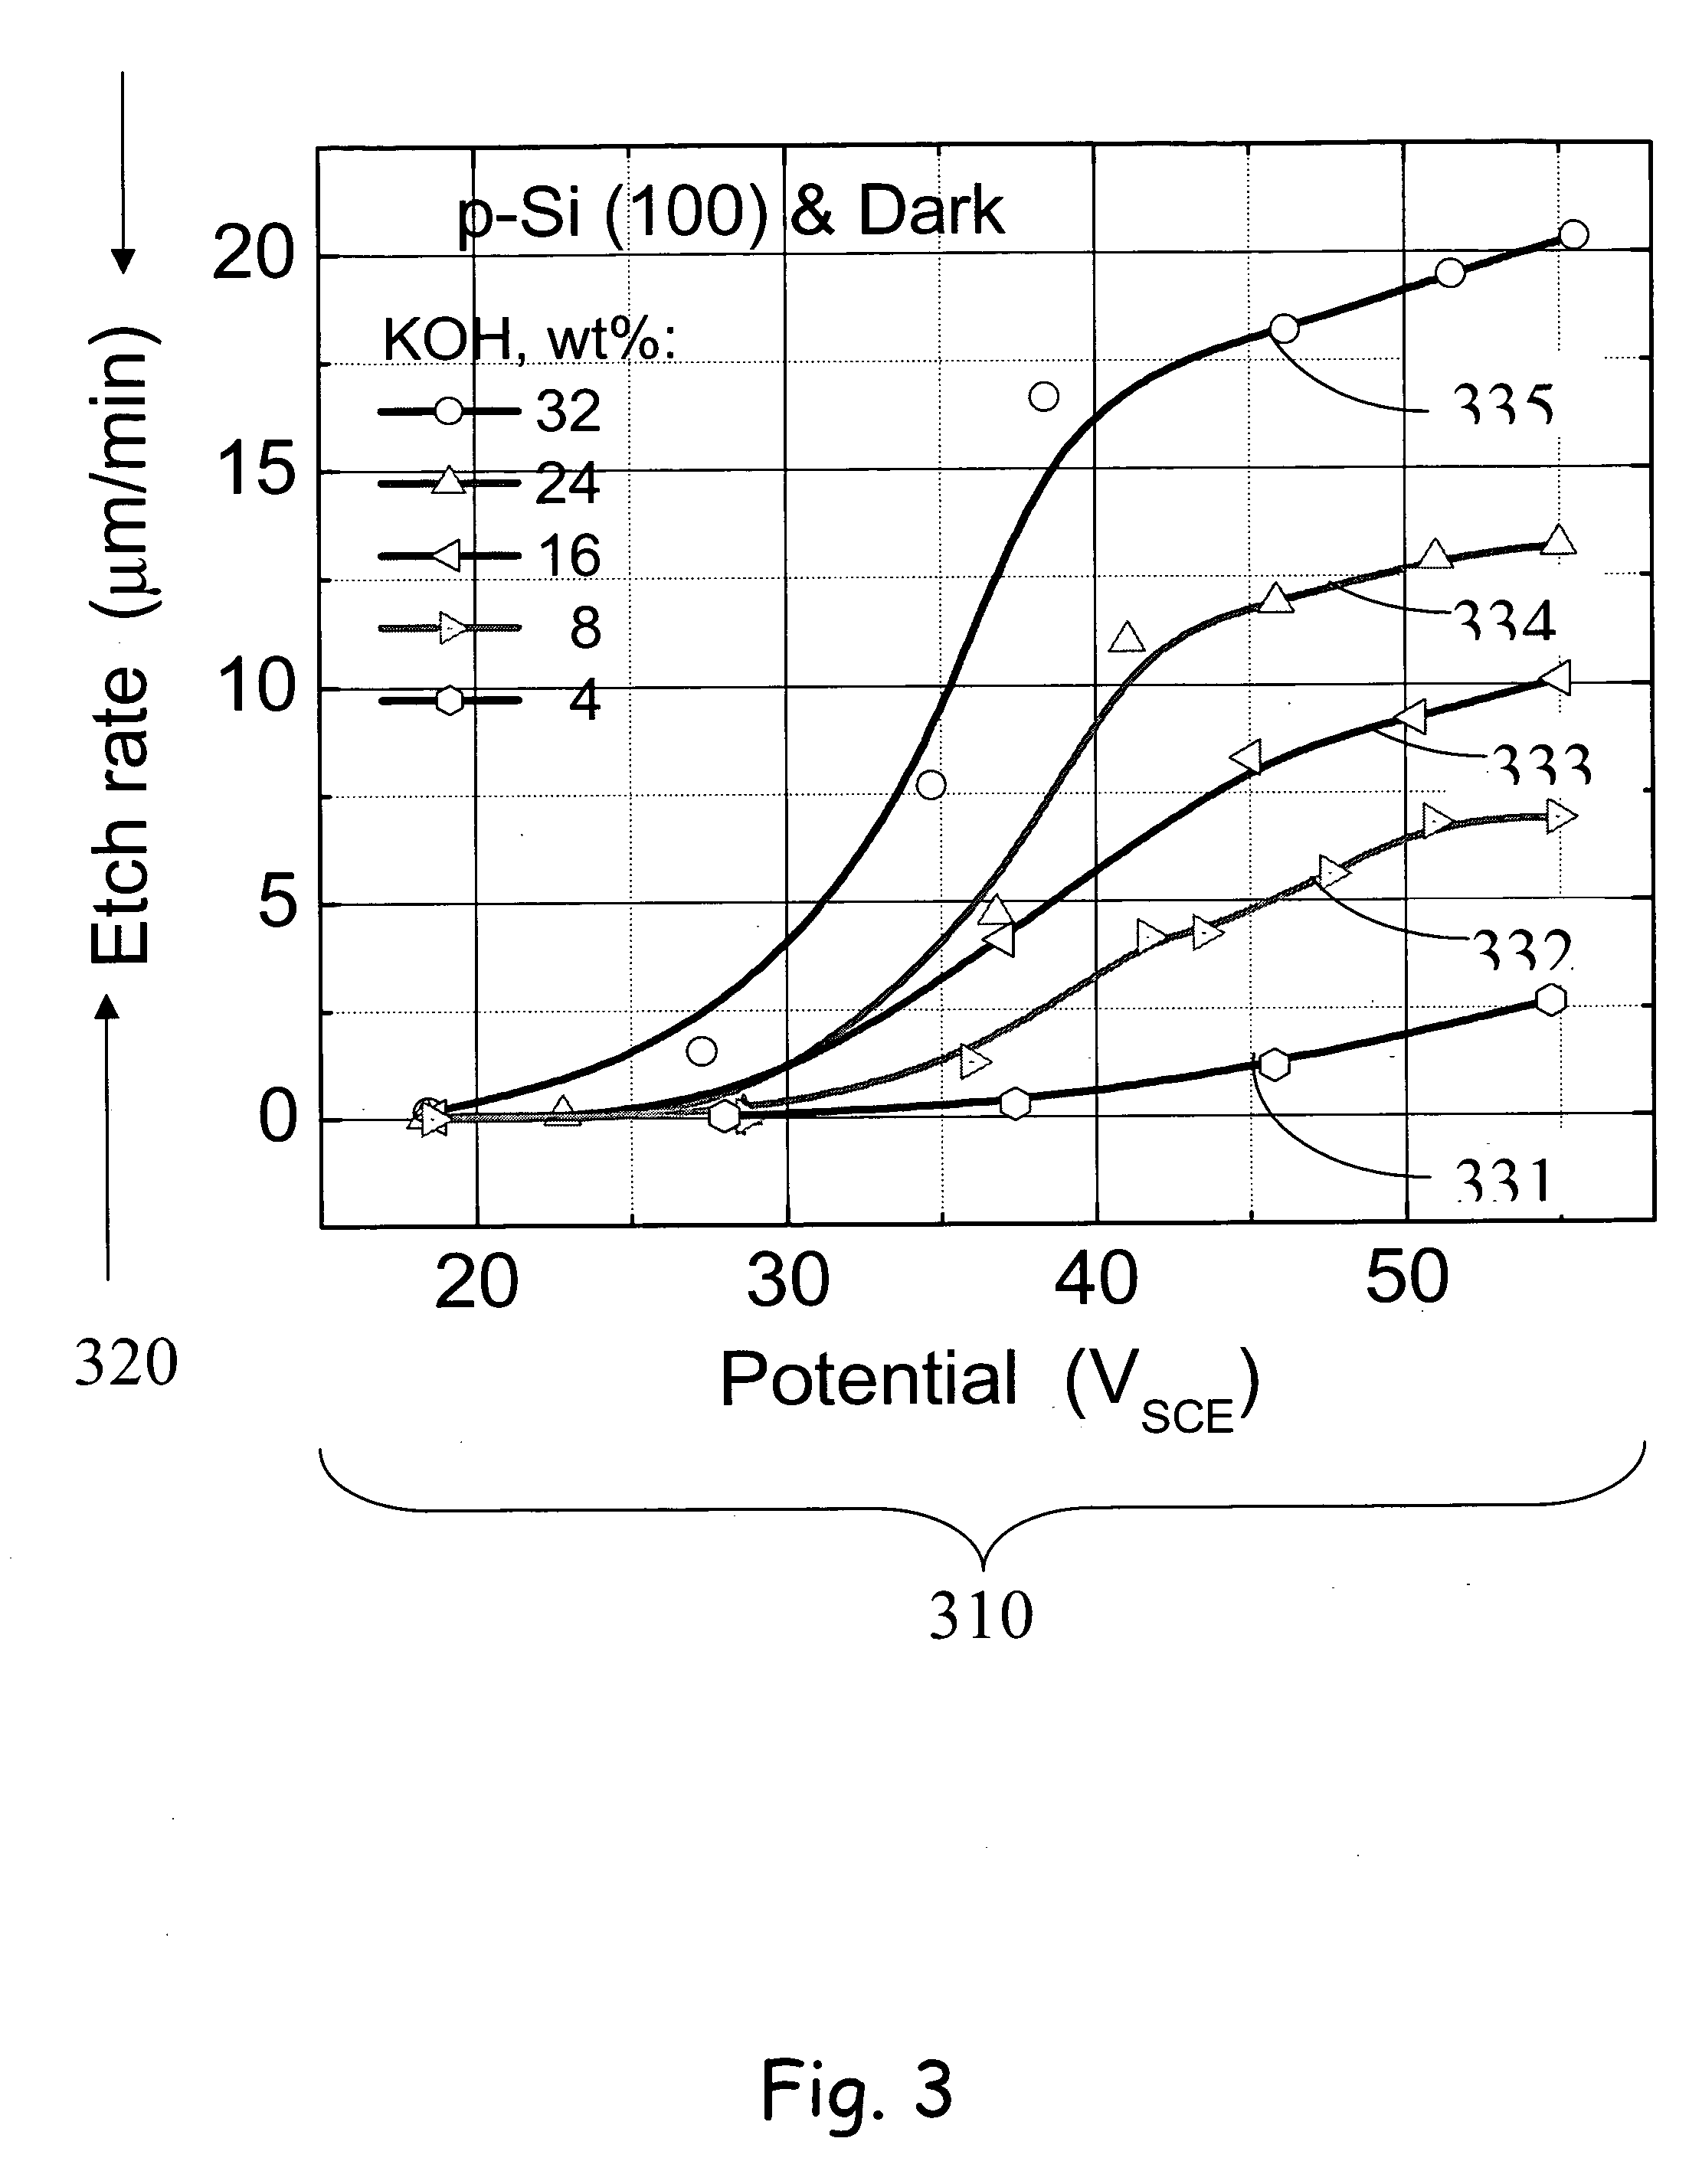 Method for electrochemical etching of semiconductor material using positive potential dissolution (PPD) in HF-free solutions